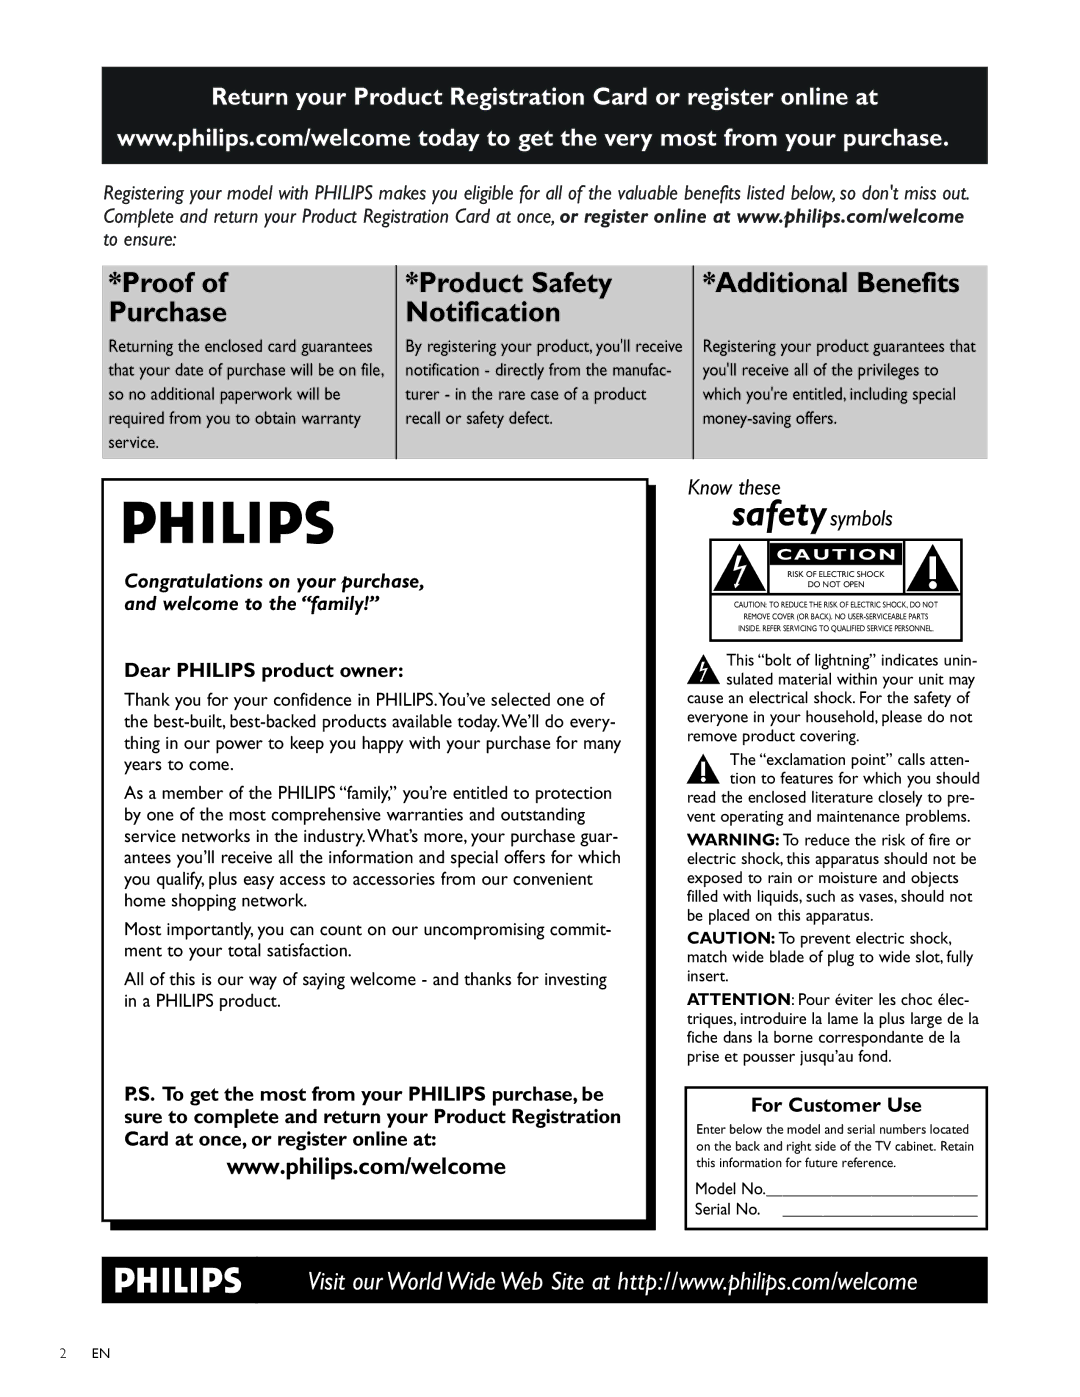 Philips 42PFL3704D, 32PFL3504D, 32PFL3514D Notification directly from the manufac, Which youre entitled, including special 